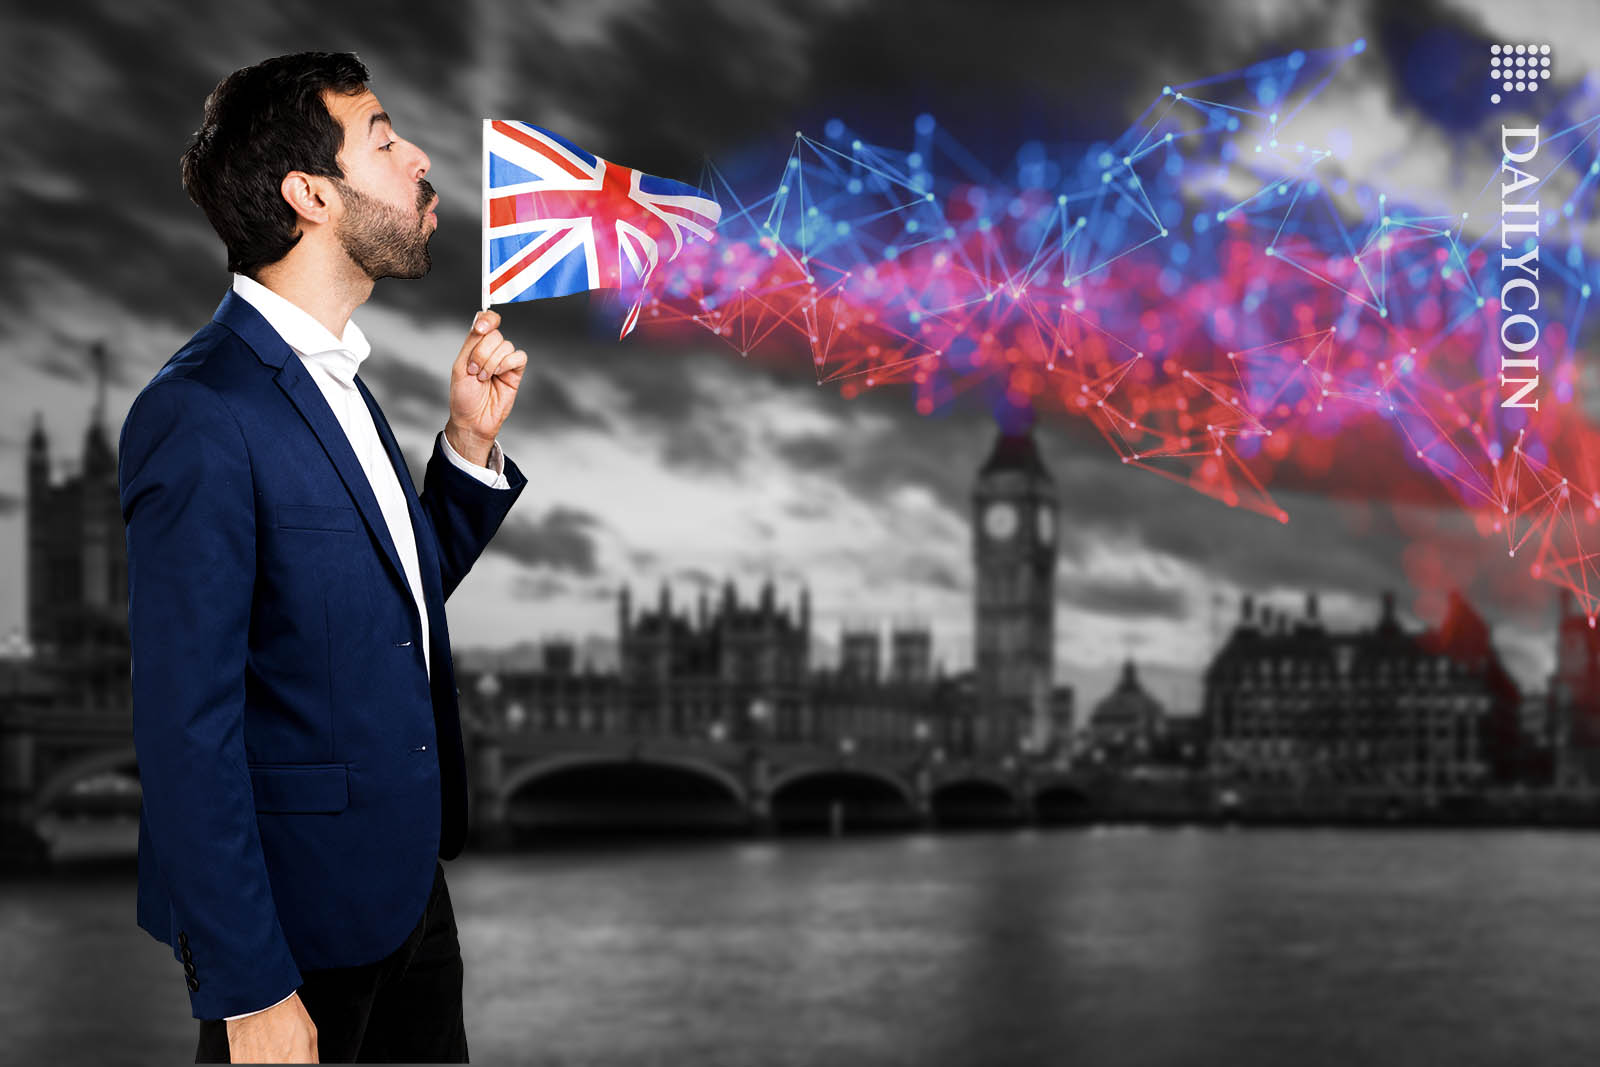 Handsome man blowing a Union Jack flag infront of the London skyline.